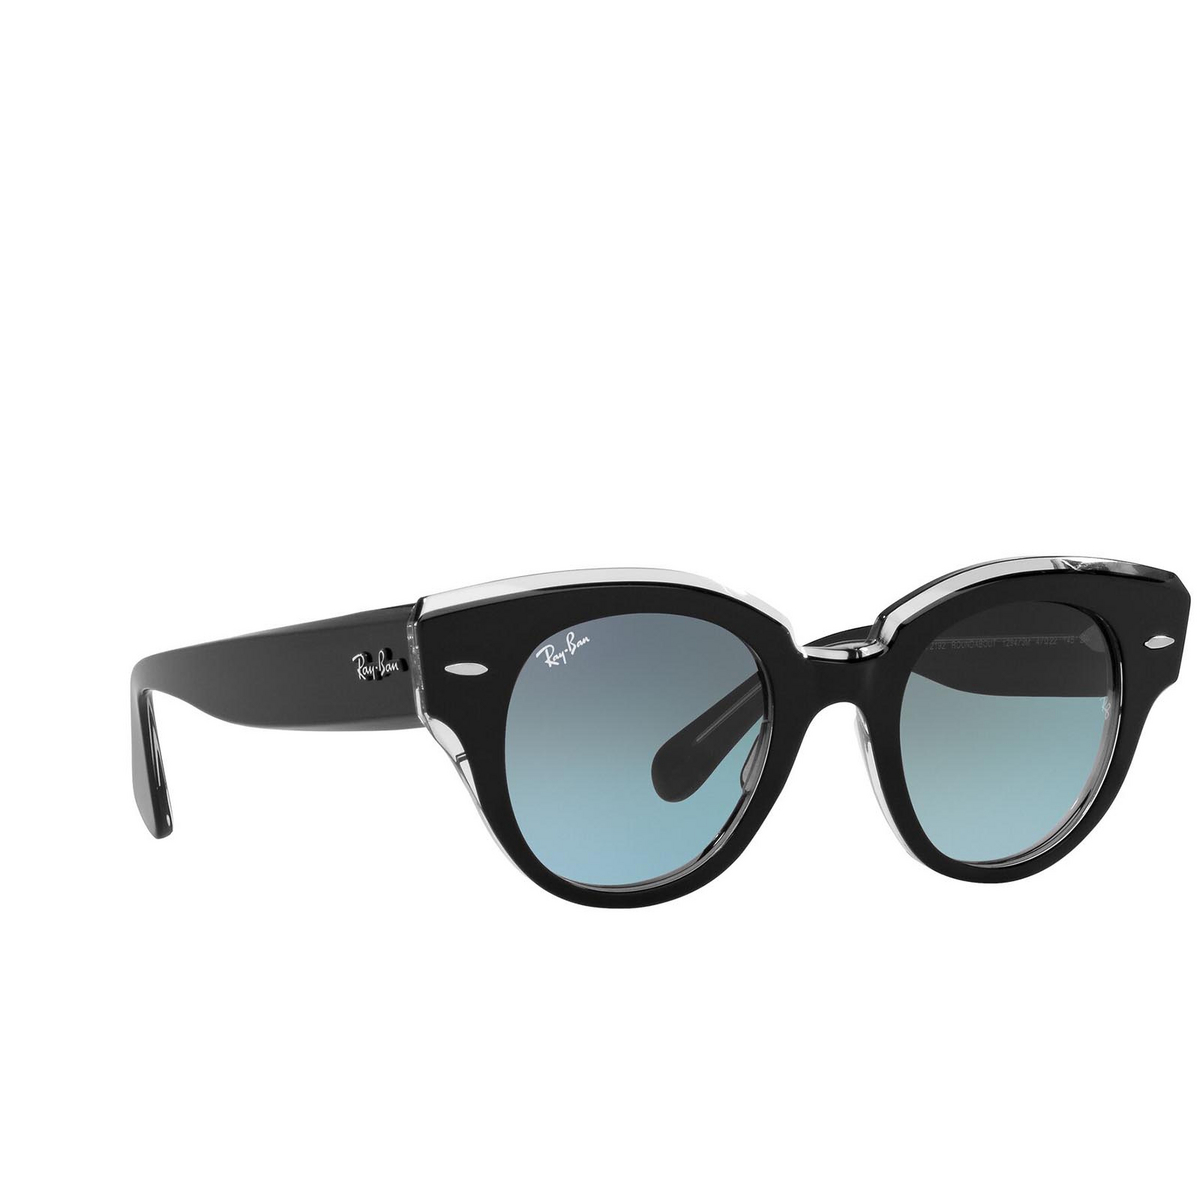 Ray-Ban ROUNDABOUT Sunglasses 12943M Black on Transparent - three-quarters view